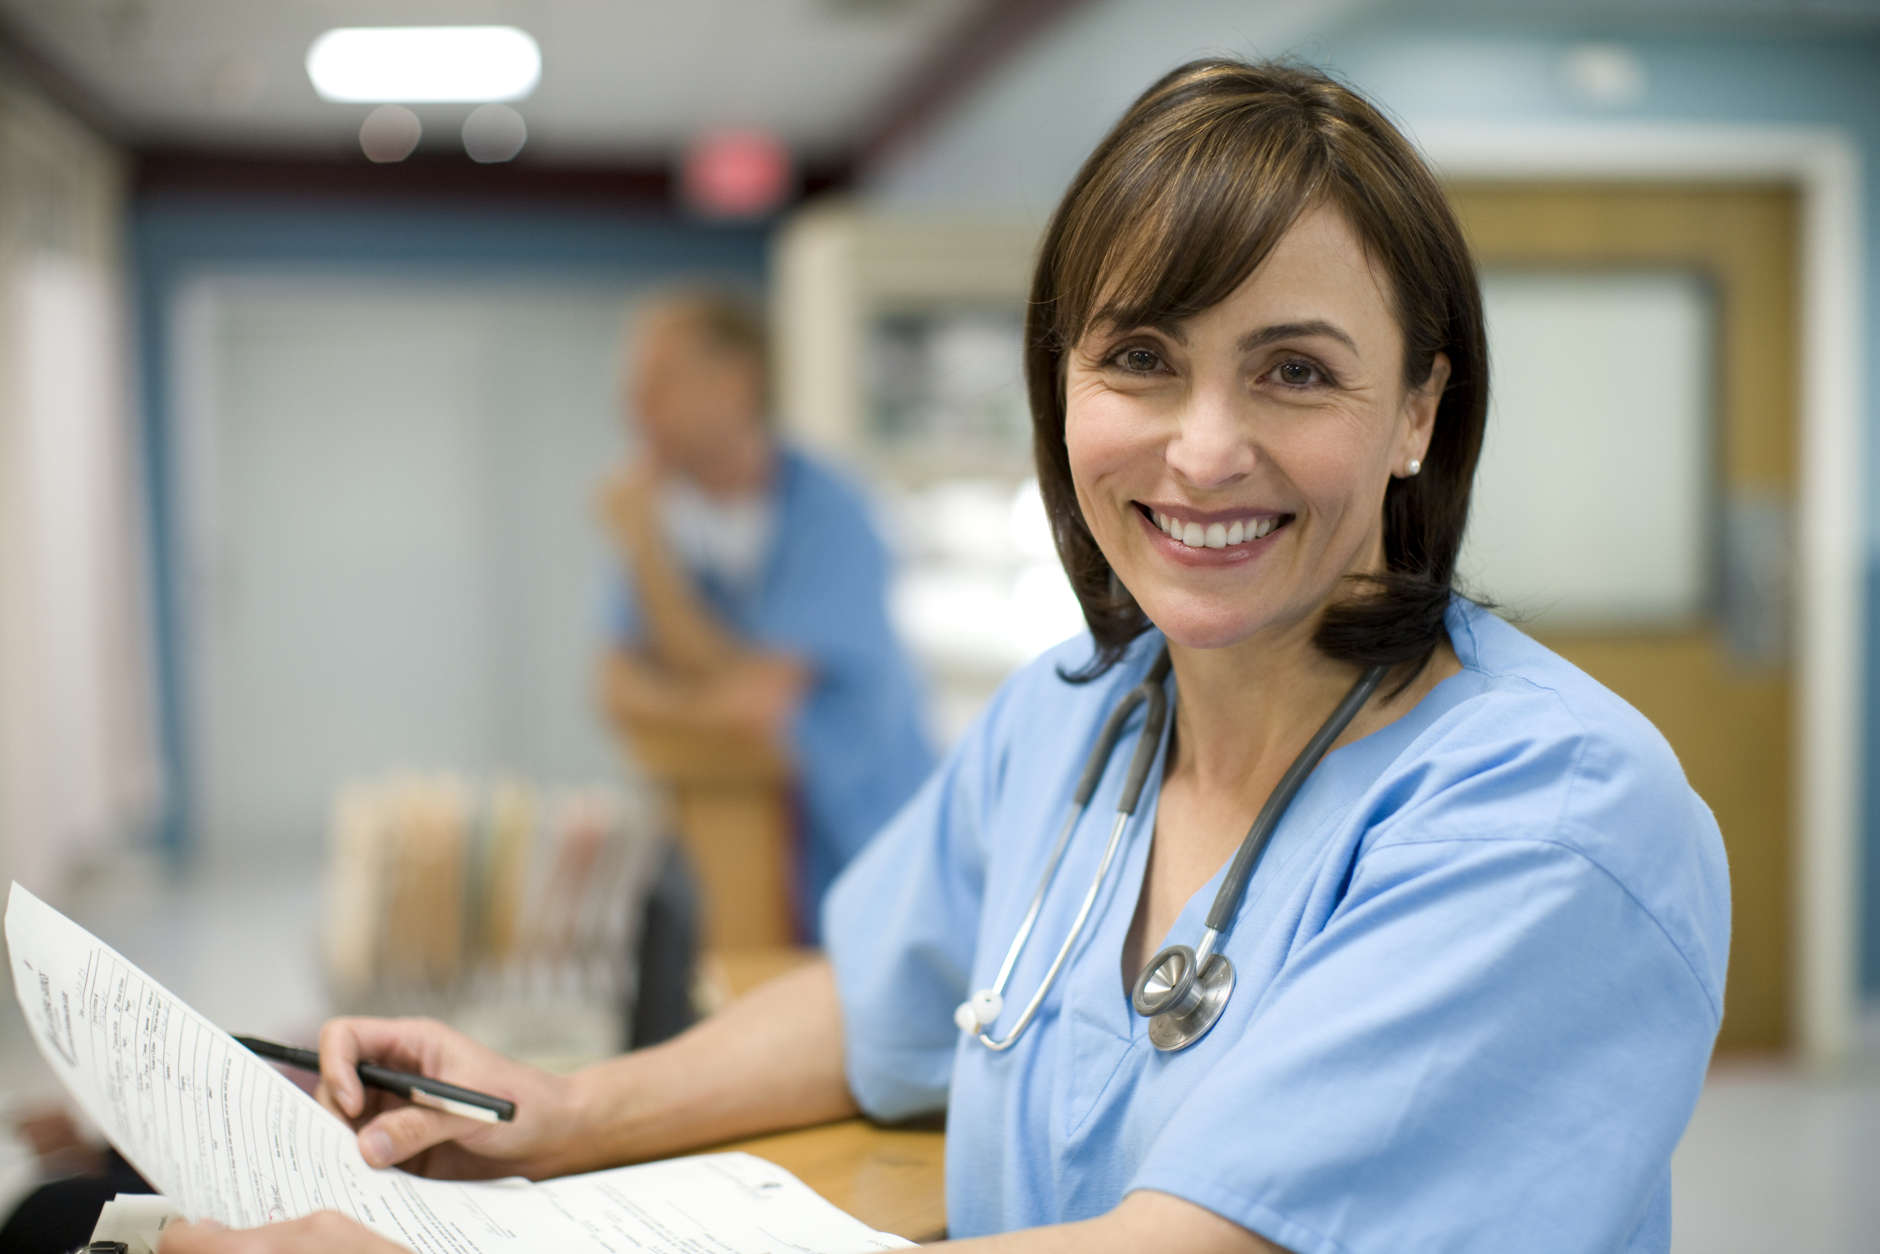 The D.C. area is a good place to get a nursing education. (Thinkstock)